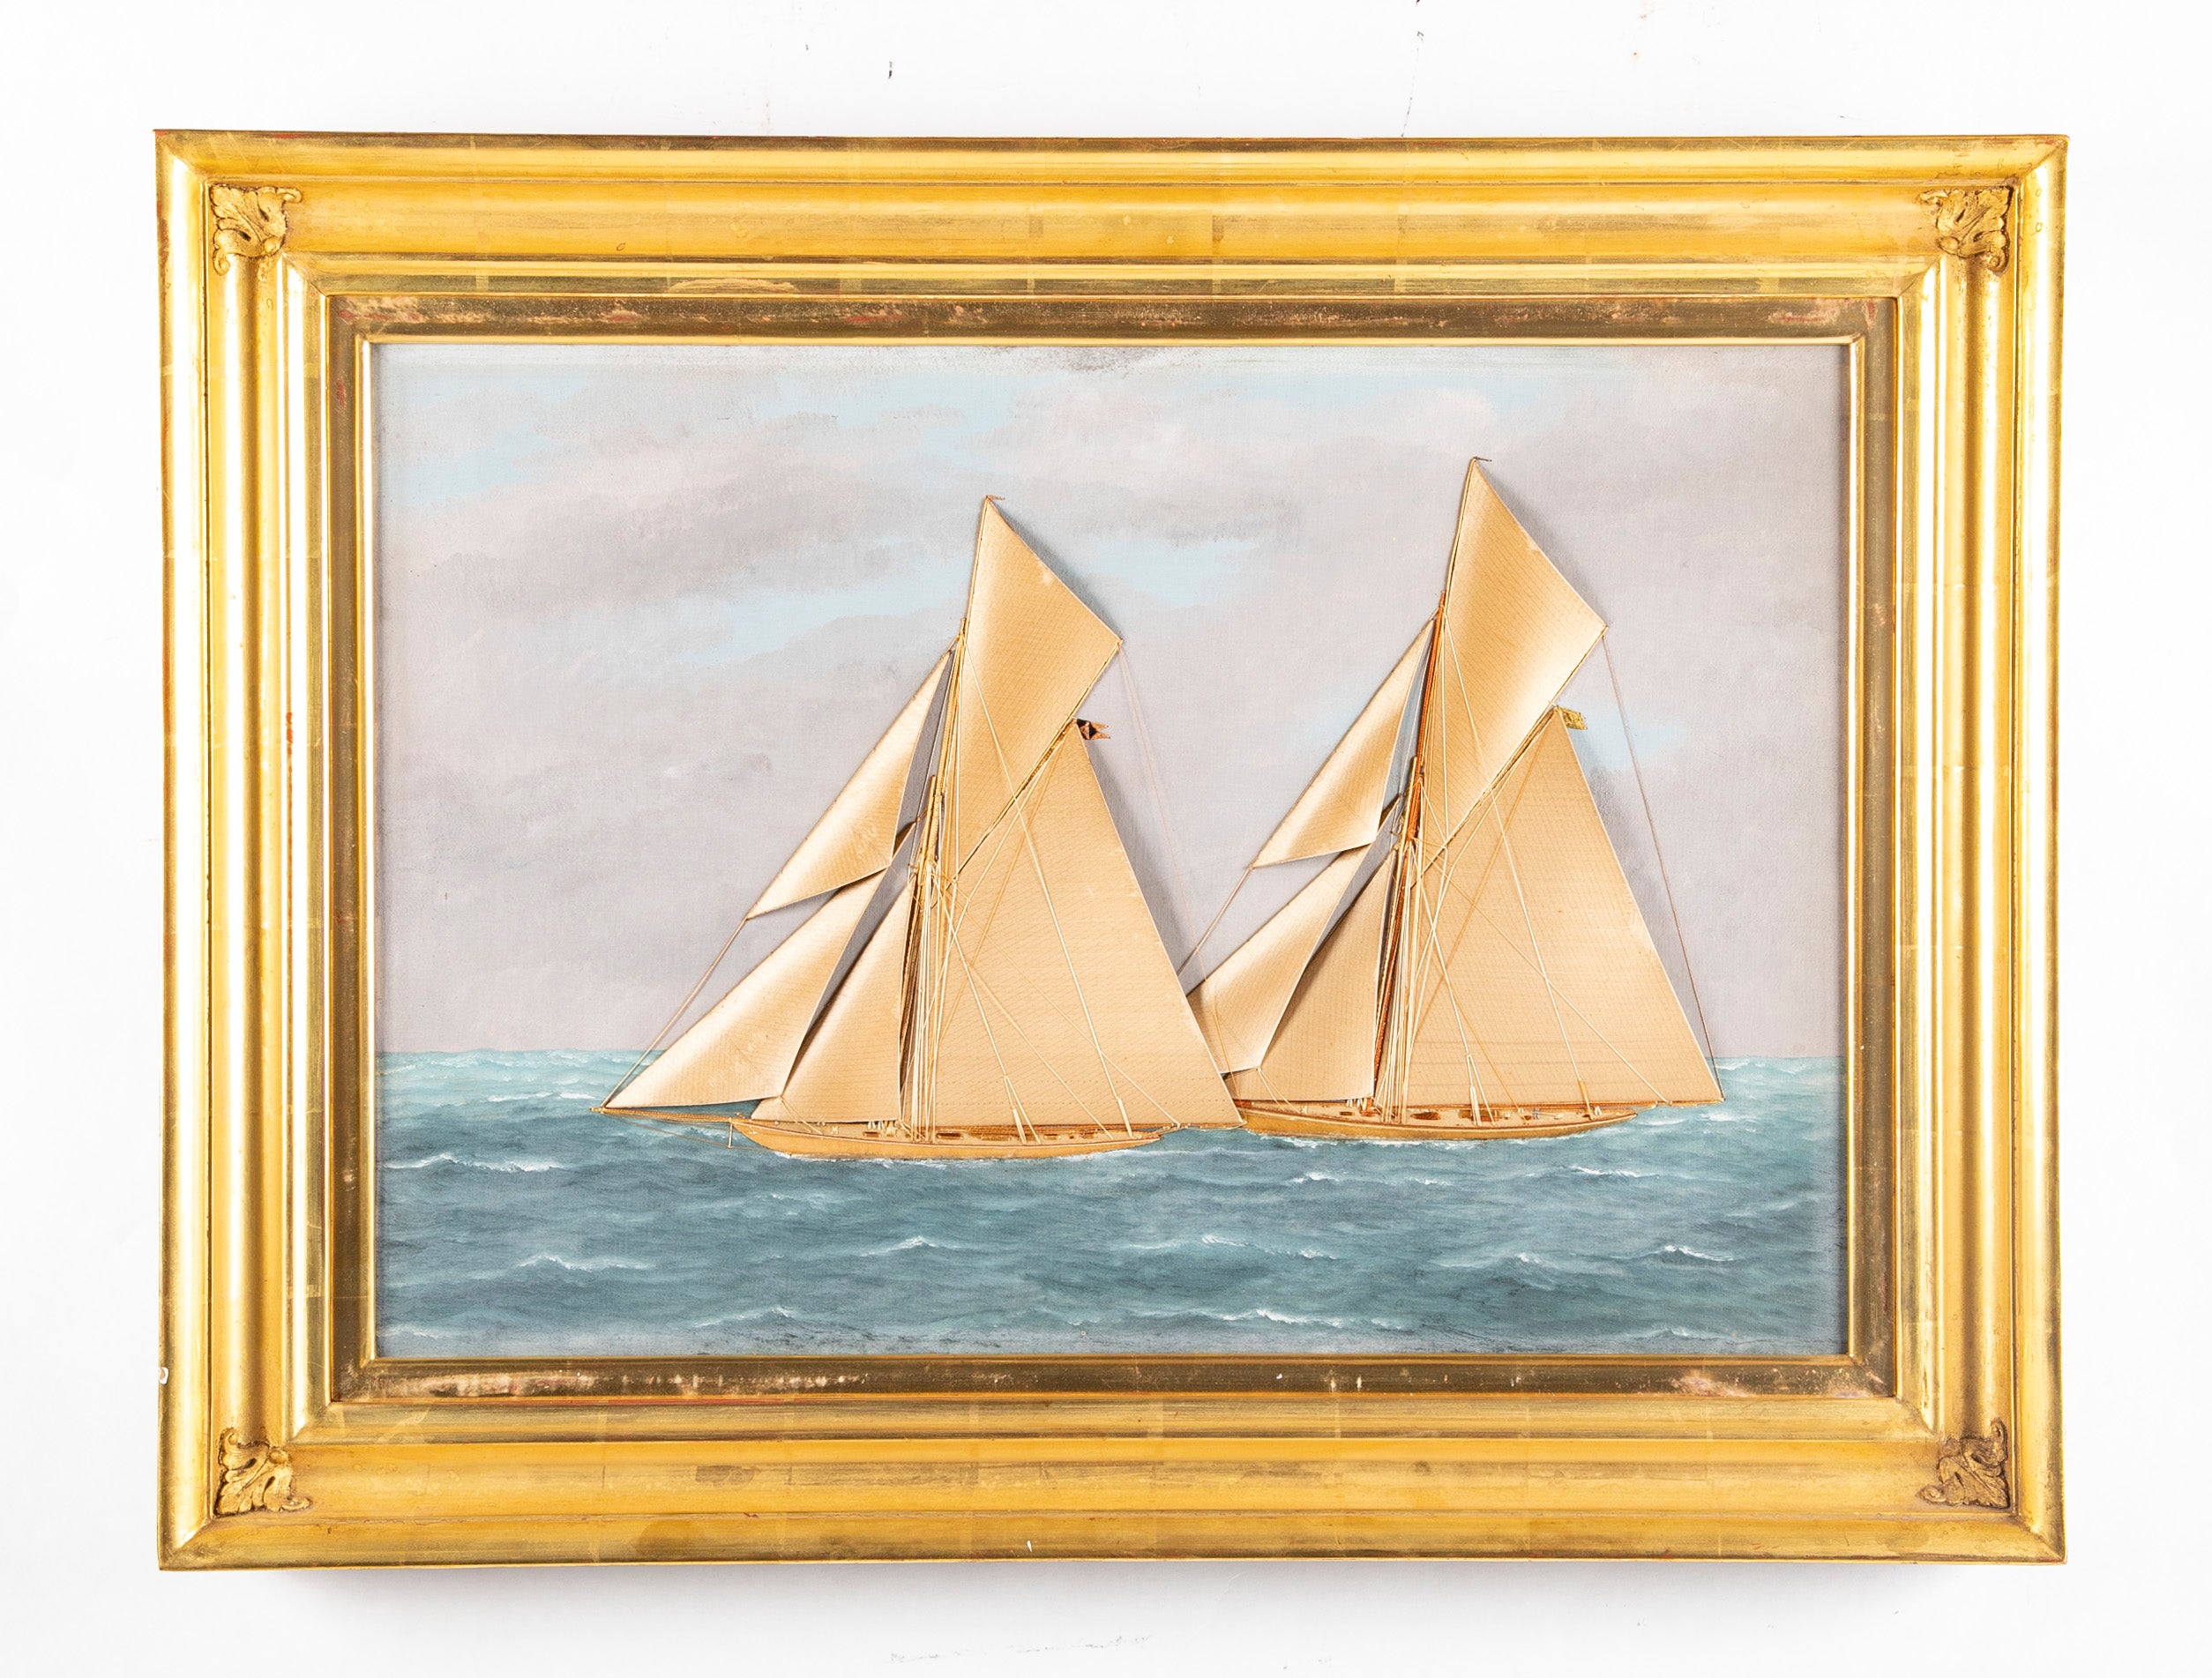 Thomas H. Willis "Silky" with Applied Silk Work on Boat and Oil Painted Background